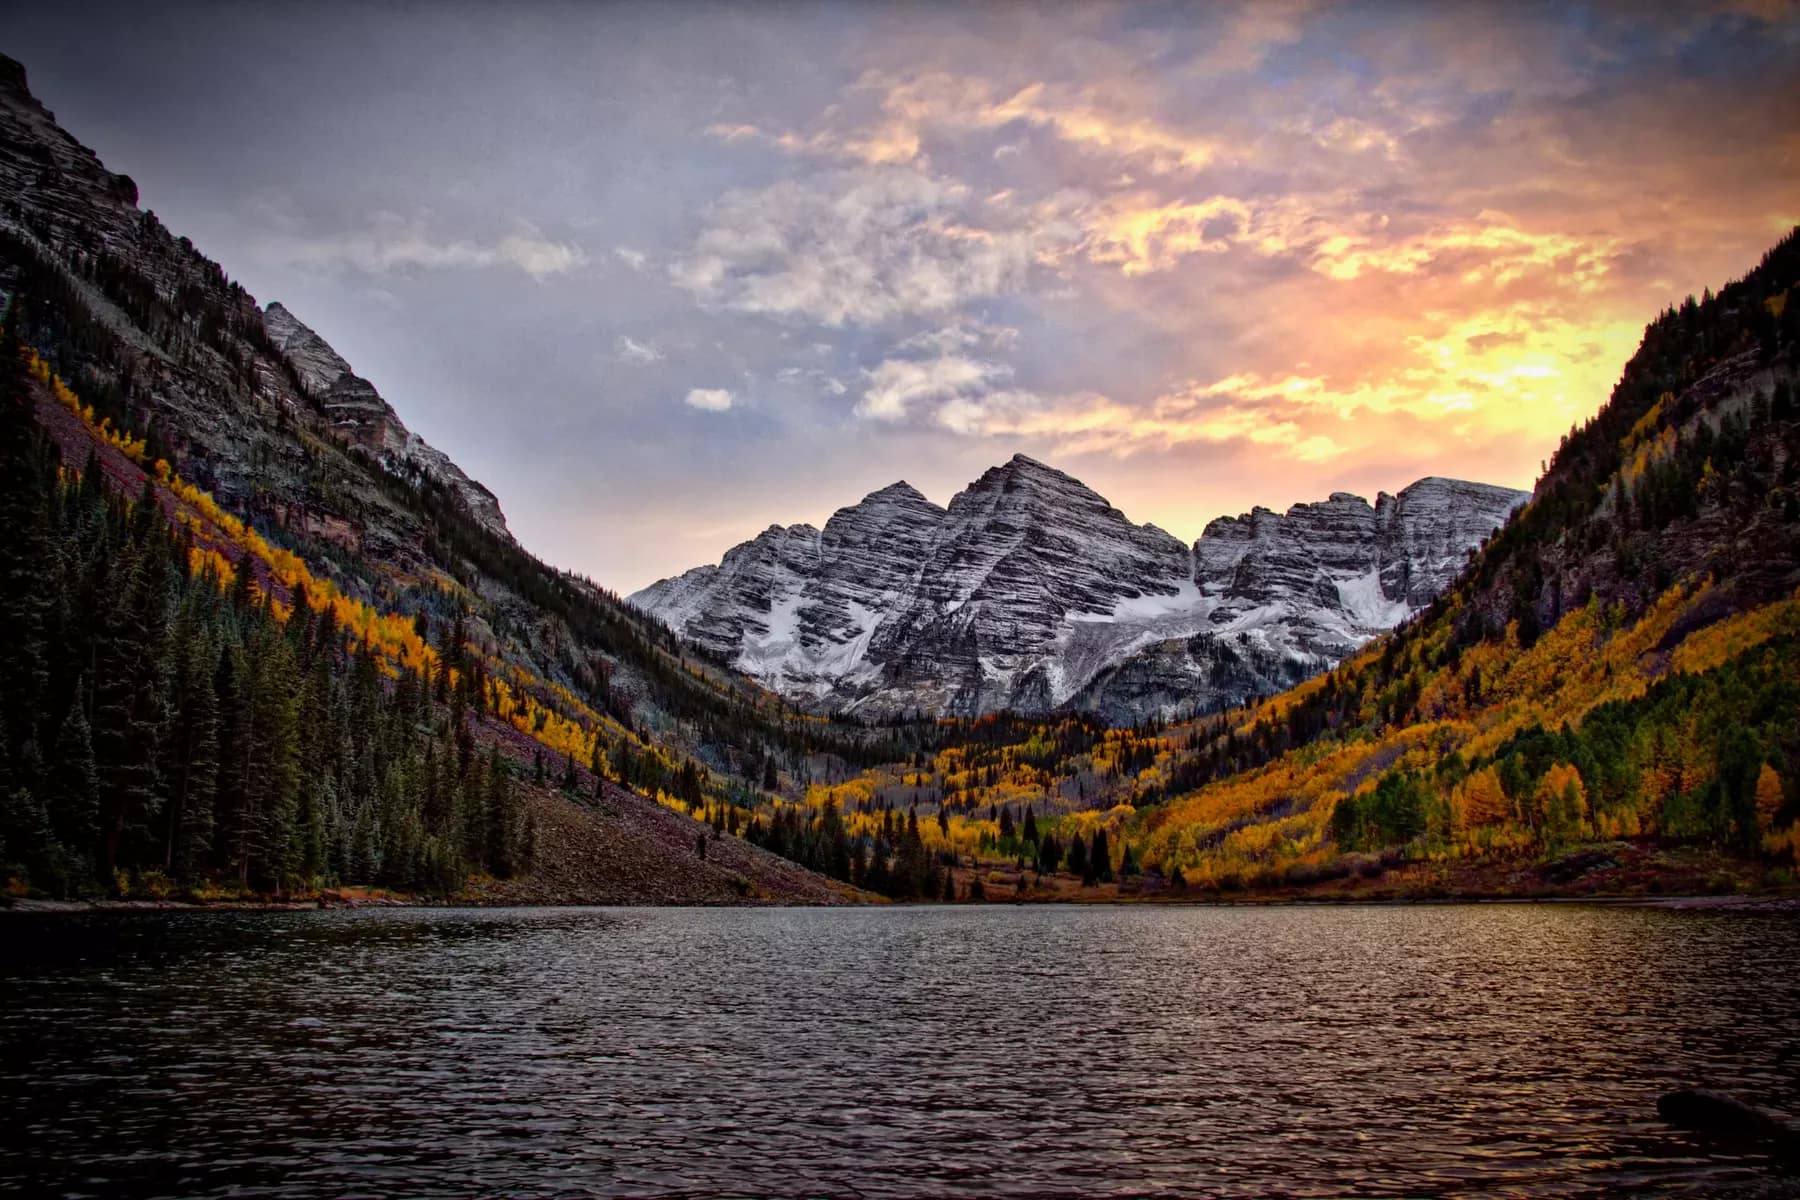 Image of North Colorado mountains - Book Outdoors